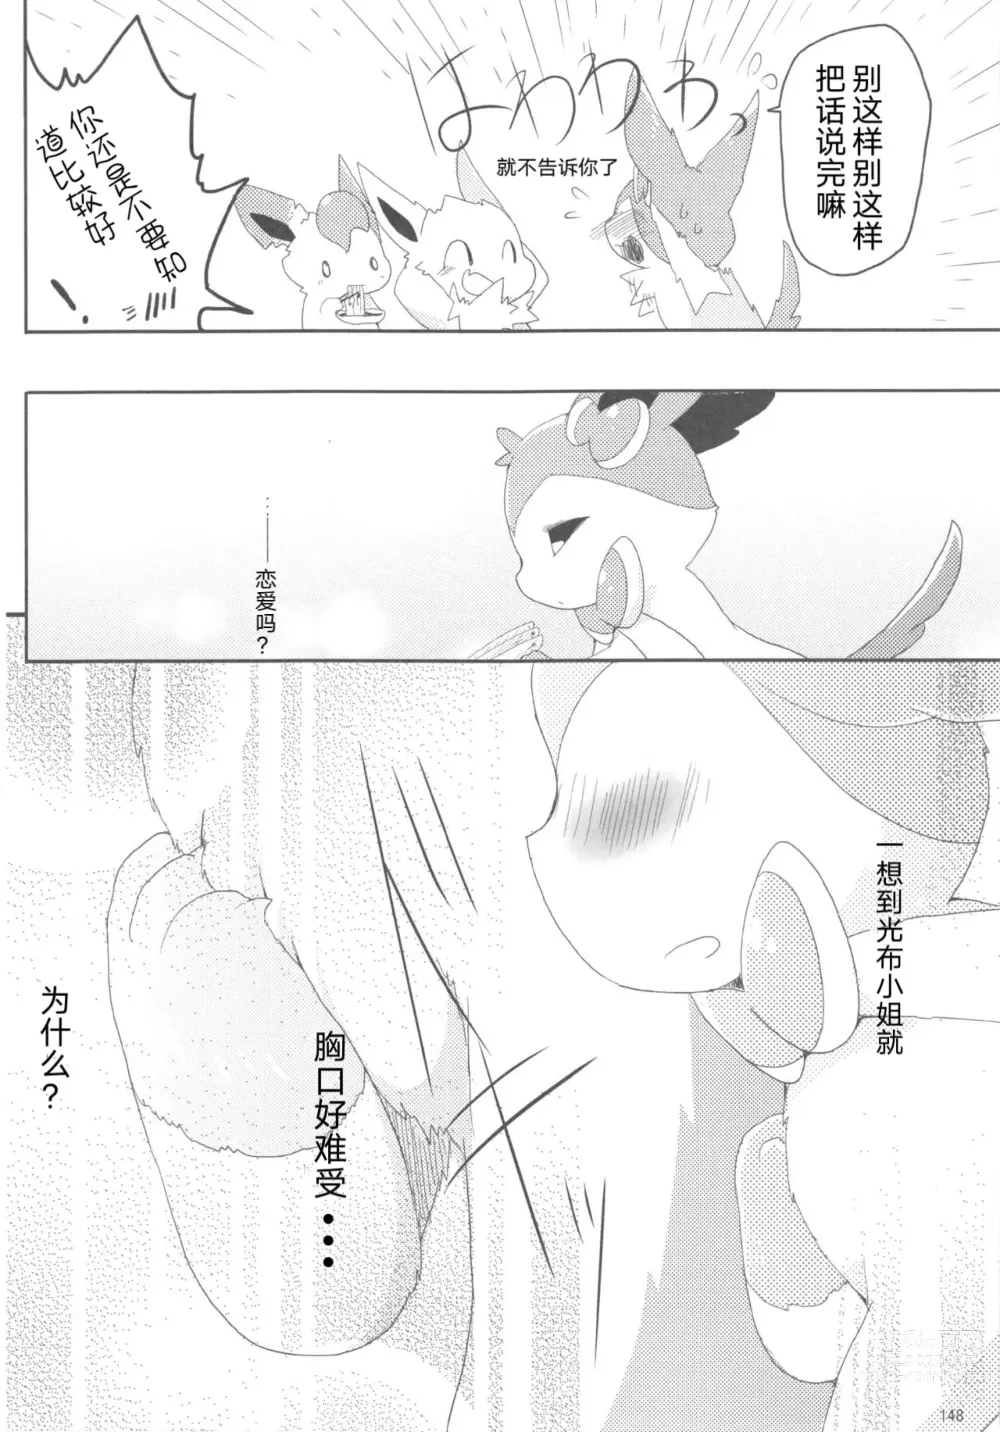 Page 9 of doujinshi Love Berry